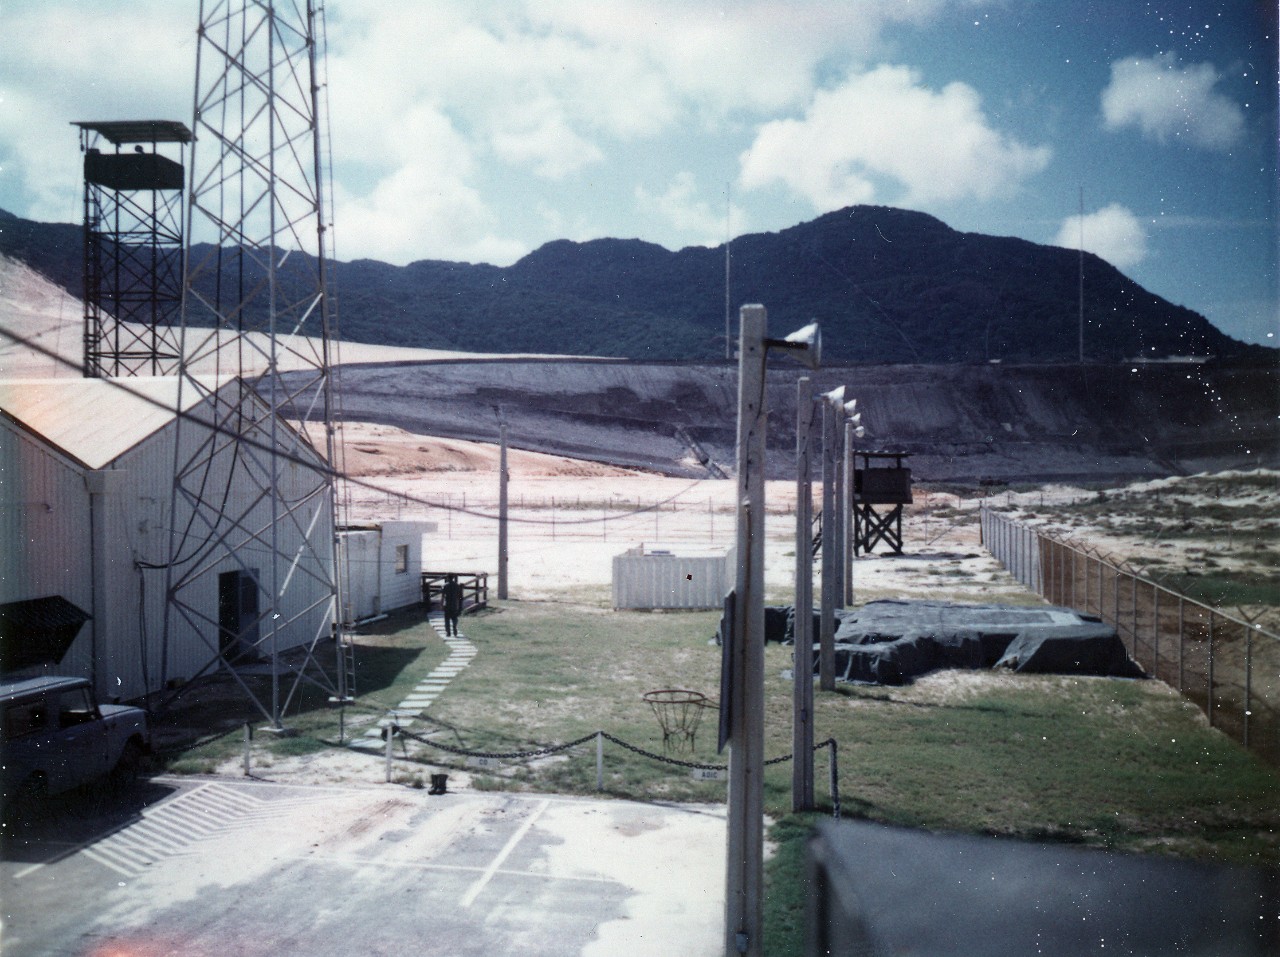 Collection of 14 photos related to Naval Communications Station Cam Ranh Bay, Vietnam, 1970-1971. The donor was commanding officer of NCS Cam Ranh Bay from August 1970 to June 1971. Subject matter consists of general base photos (including aerial), as well some of the many pet dogs at the receiver site, CDR William J. Longhi at his trailer at the NCS receiver site, on patrol in dune buggy, main gate, CO quarters, office briefings. Several of the images have been given individual image numbers in the NH series (NH 106463 – NH 106470). The documents in this collection include base newsletters, change of command announcements, and communication bulletins. 